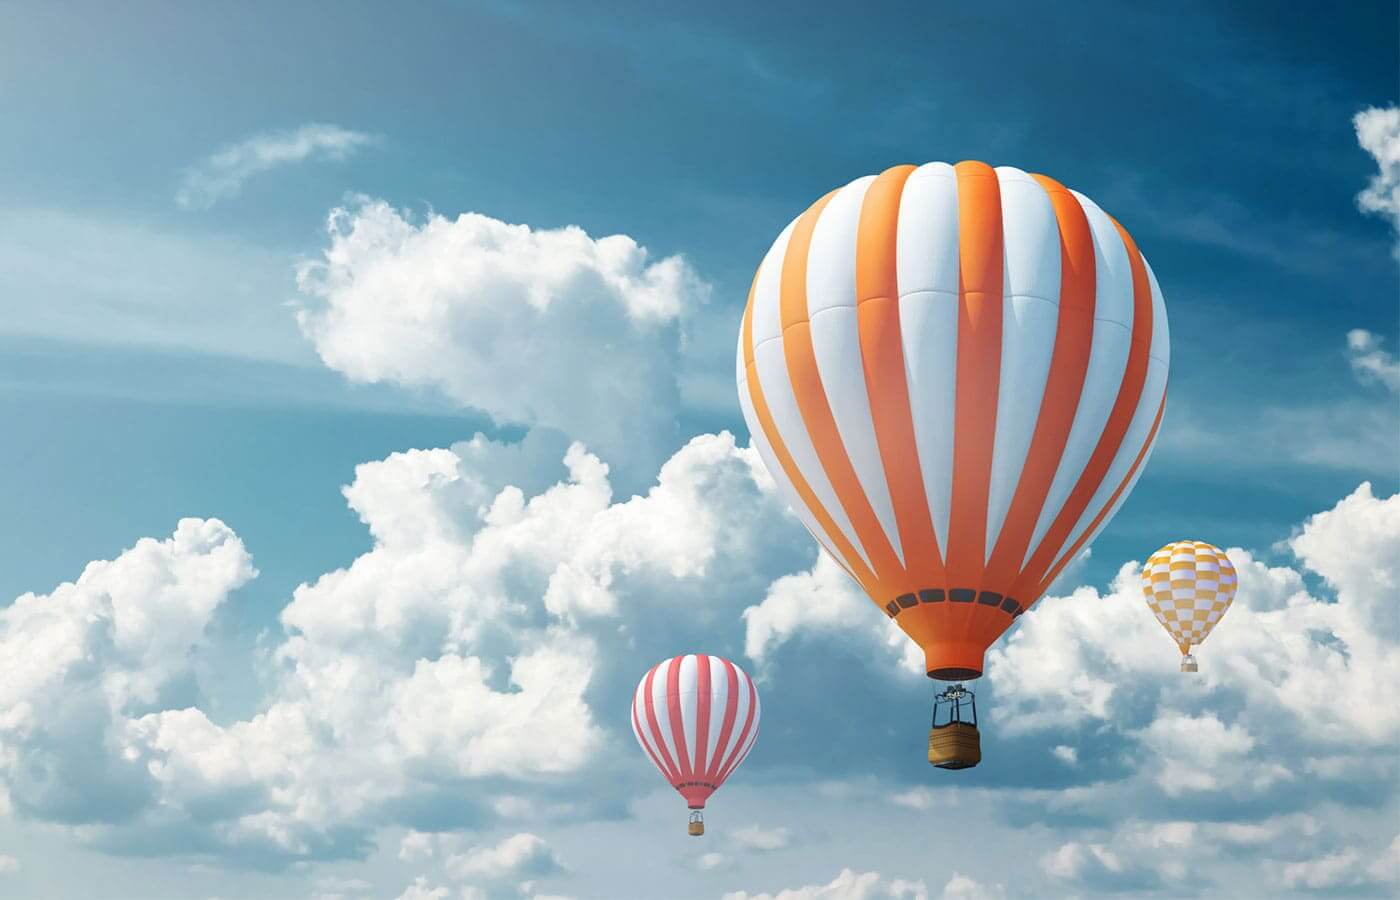 Large hot air balloons traveling in a clear blue sky